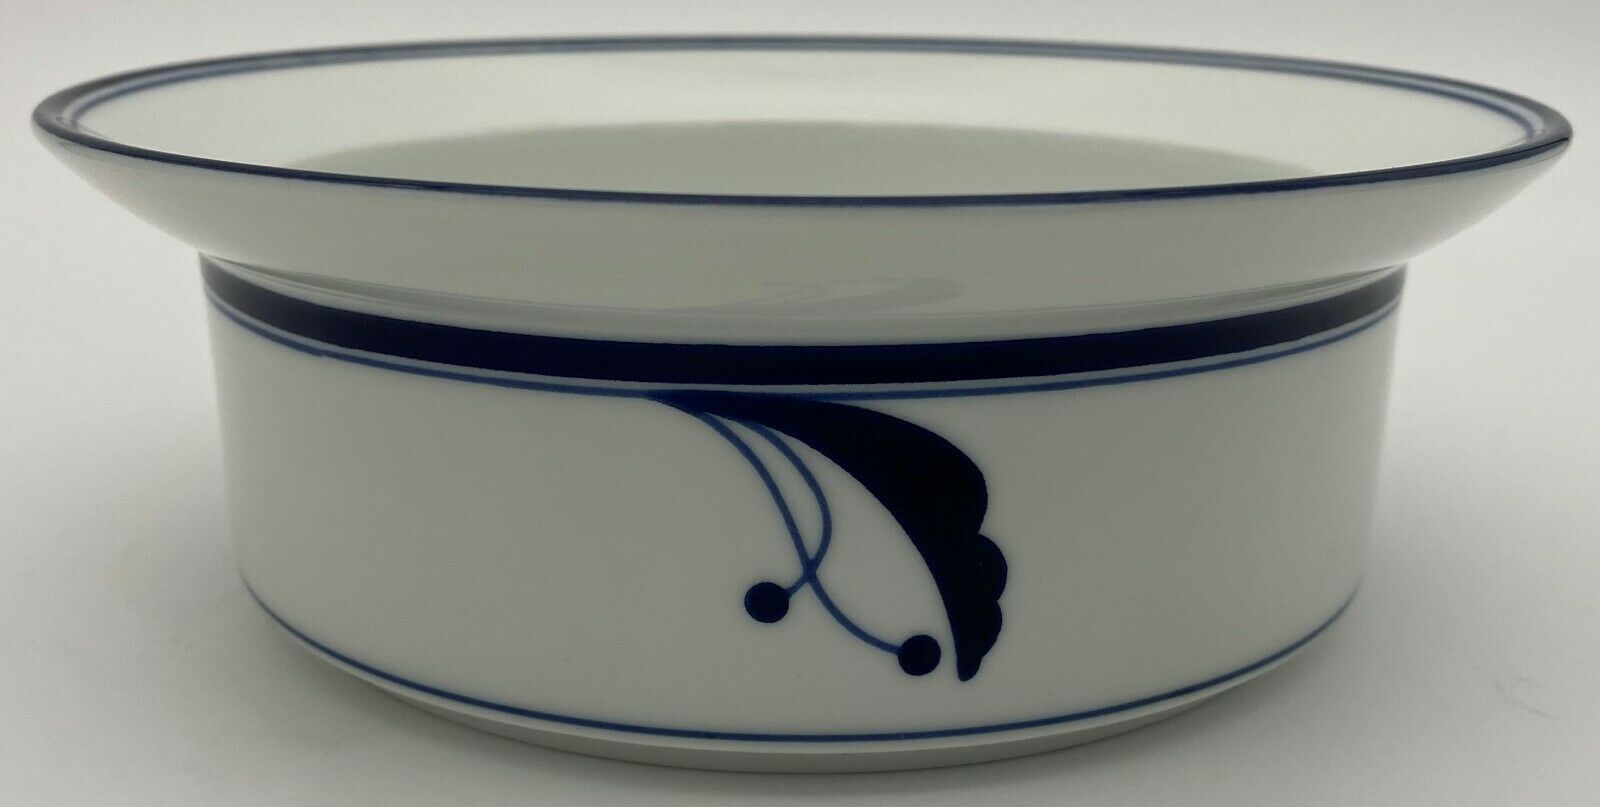 Primary image for Dansk Bayberry Blue Cereal bowl